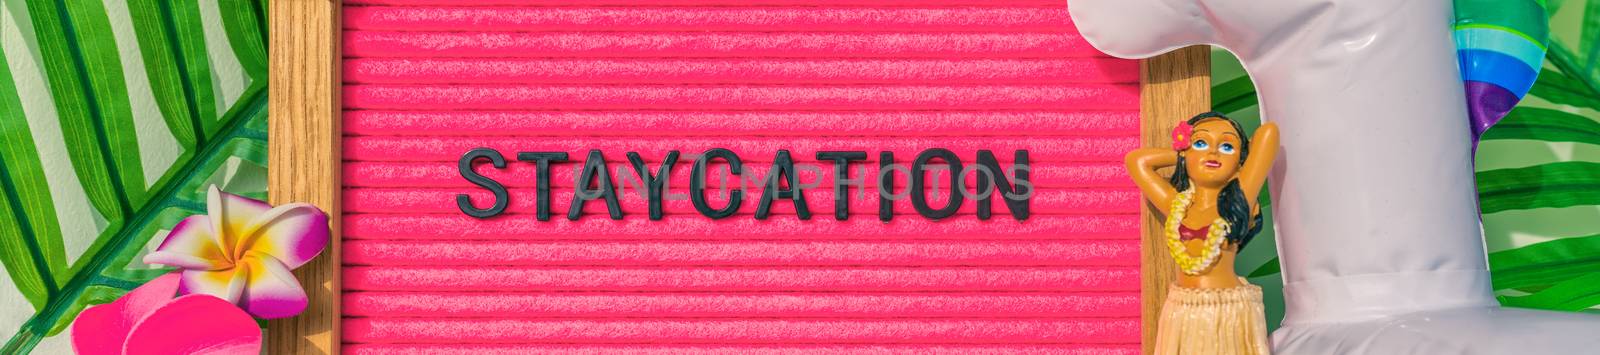 Staycation banner sign for summer vacation plans during COVID-19. Funny pink felt board text for staying home for the holidays. What to do this summer without traveling by Maridav